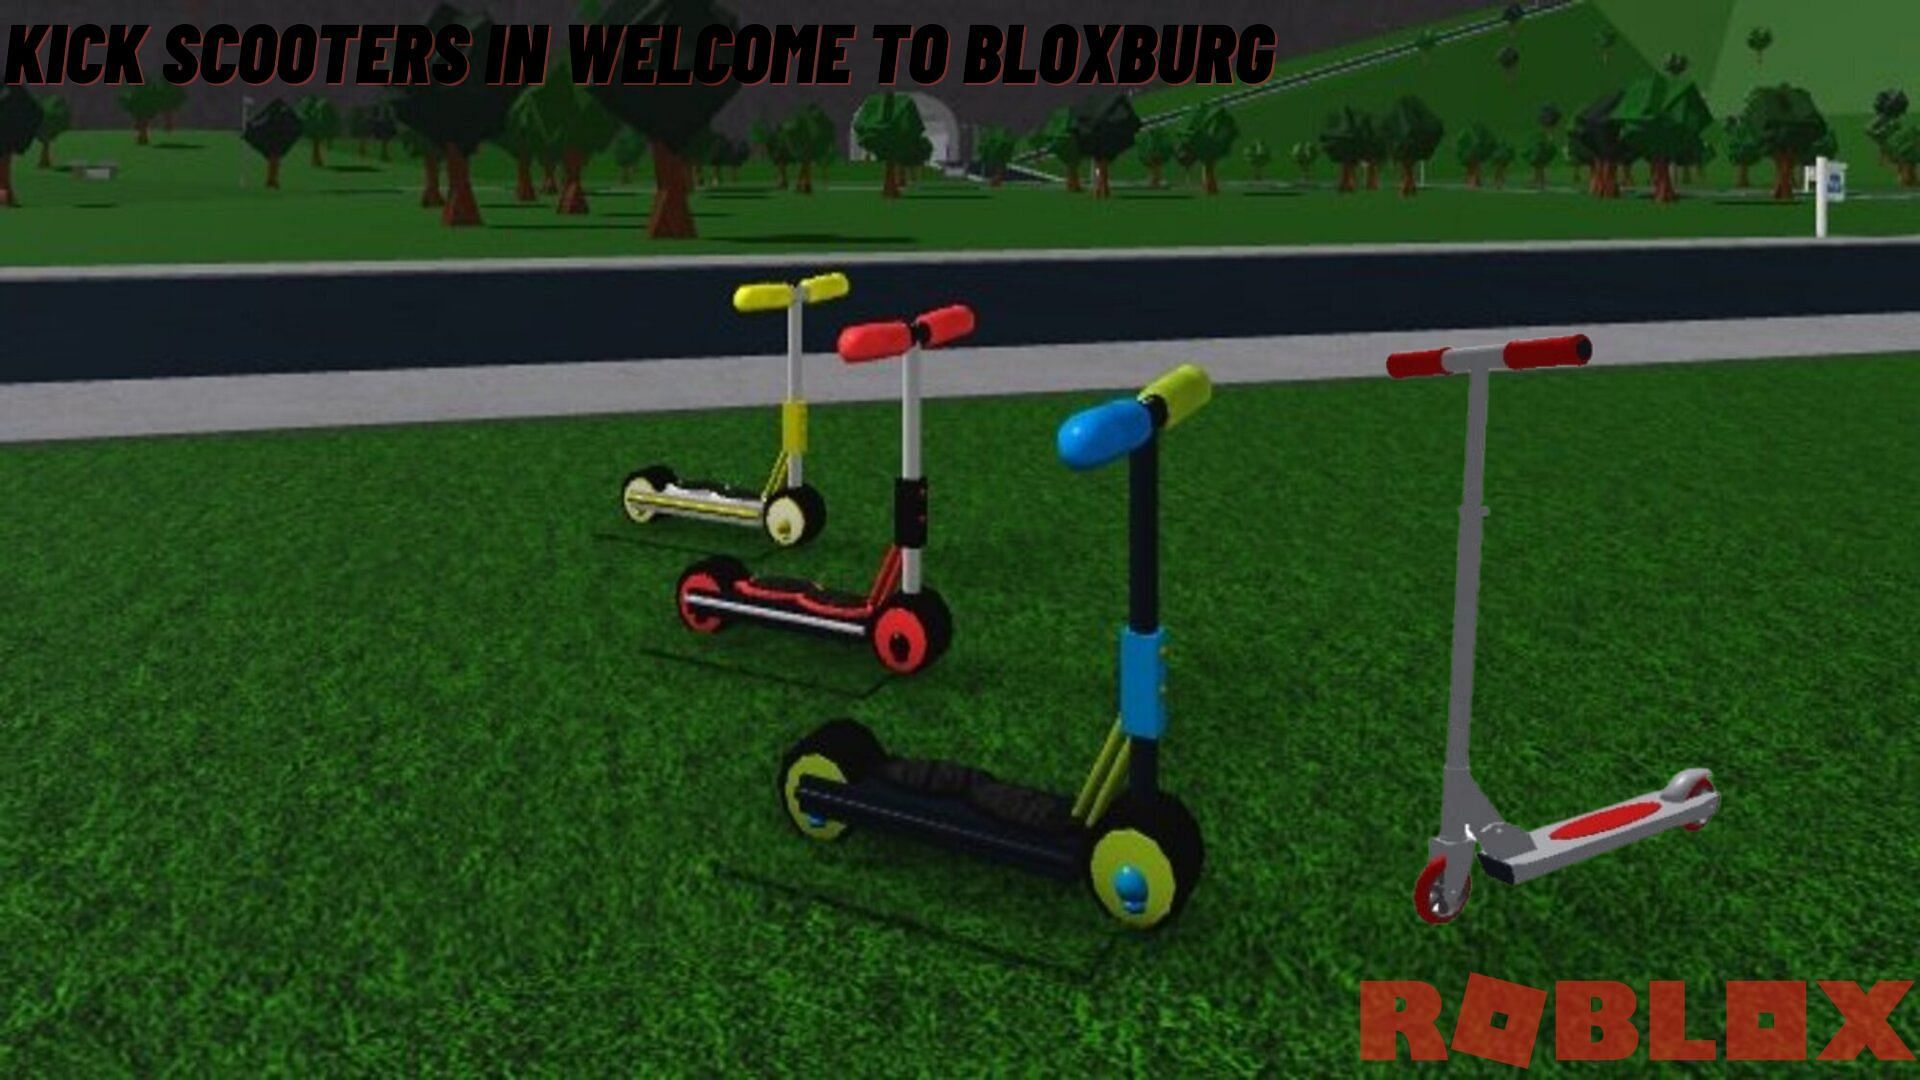 Cruise the city with different types of scooters in Bloxburg (Image via Roblox)